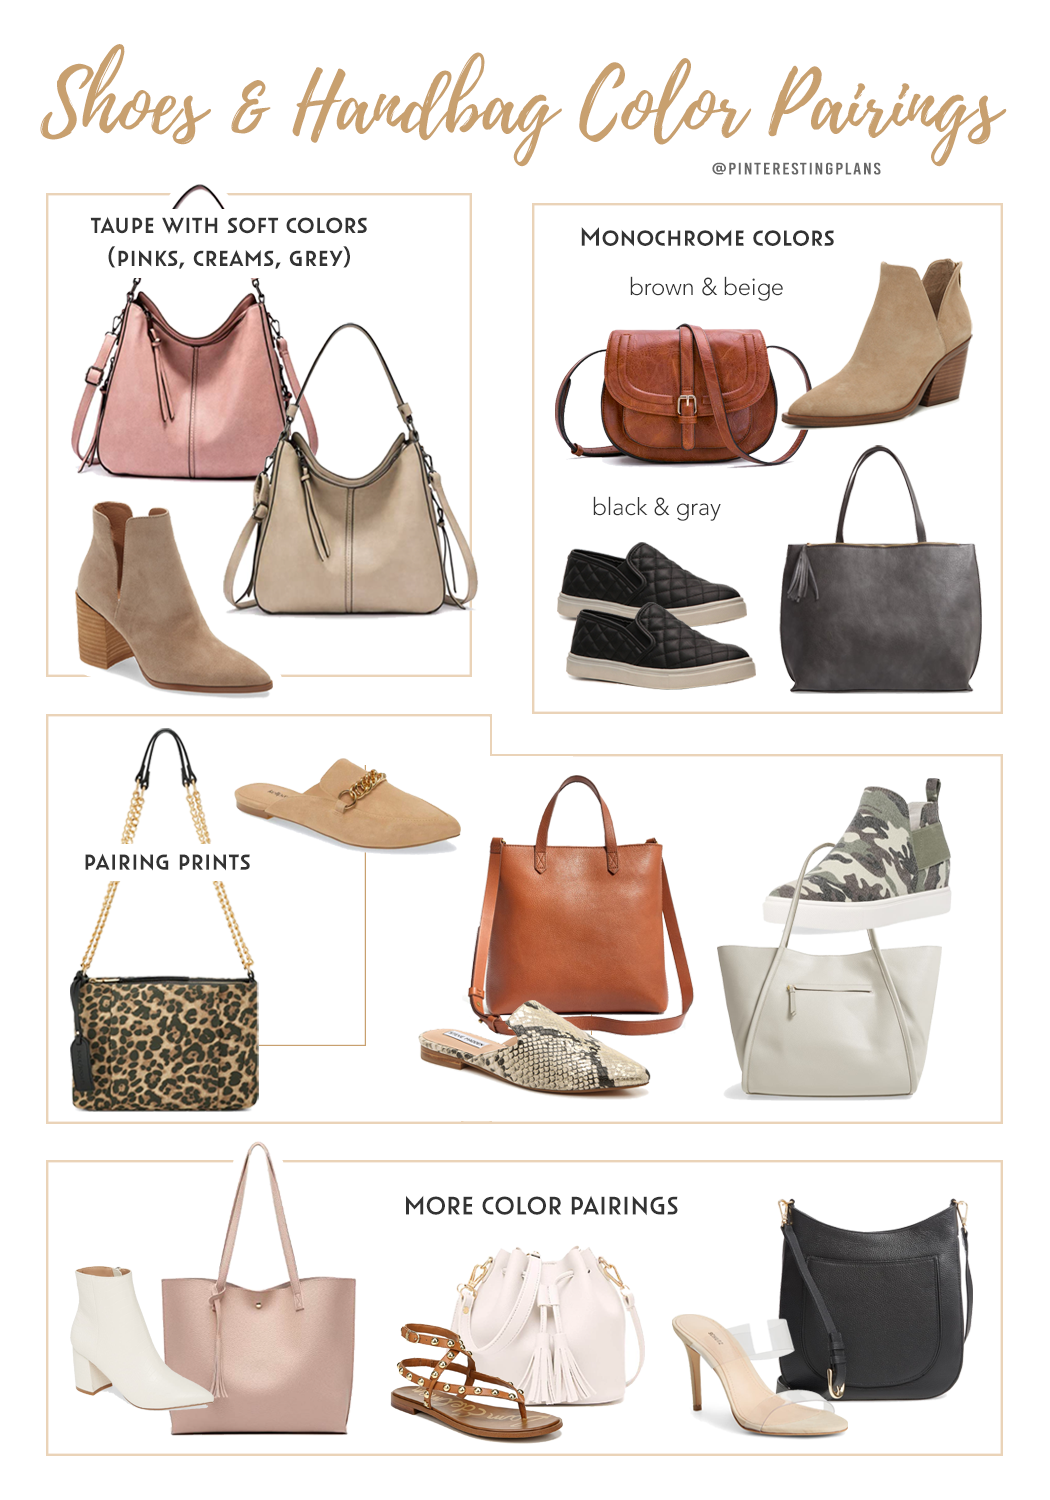 How to Match Shoes & Handbag - Color Pairings that Go Together -  Pinteresting Plans